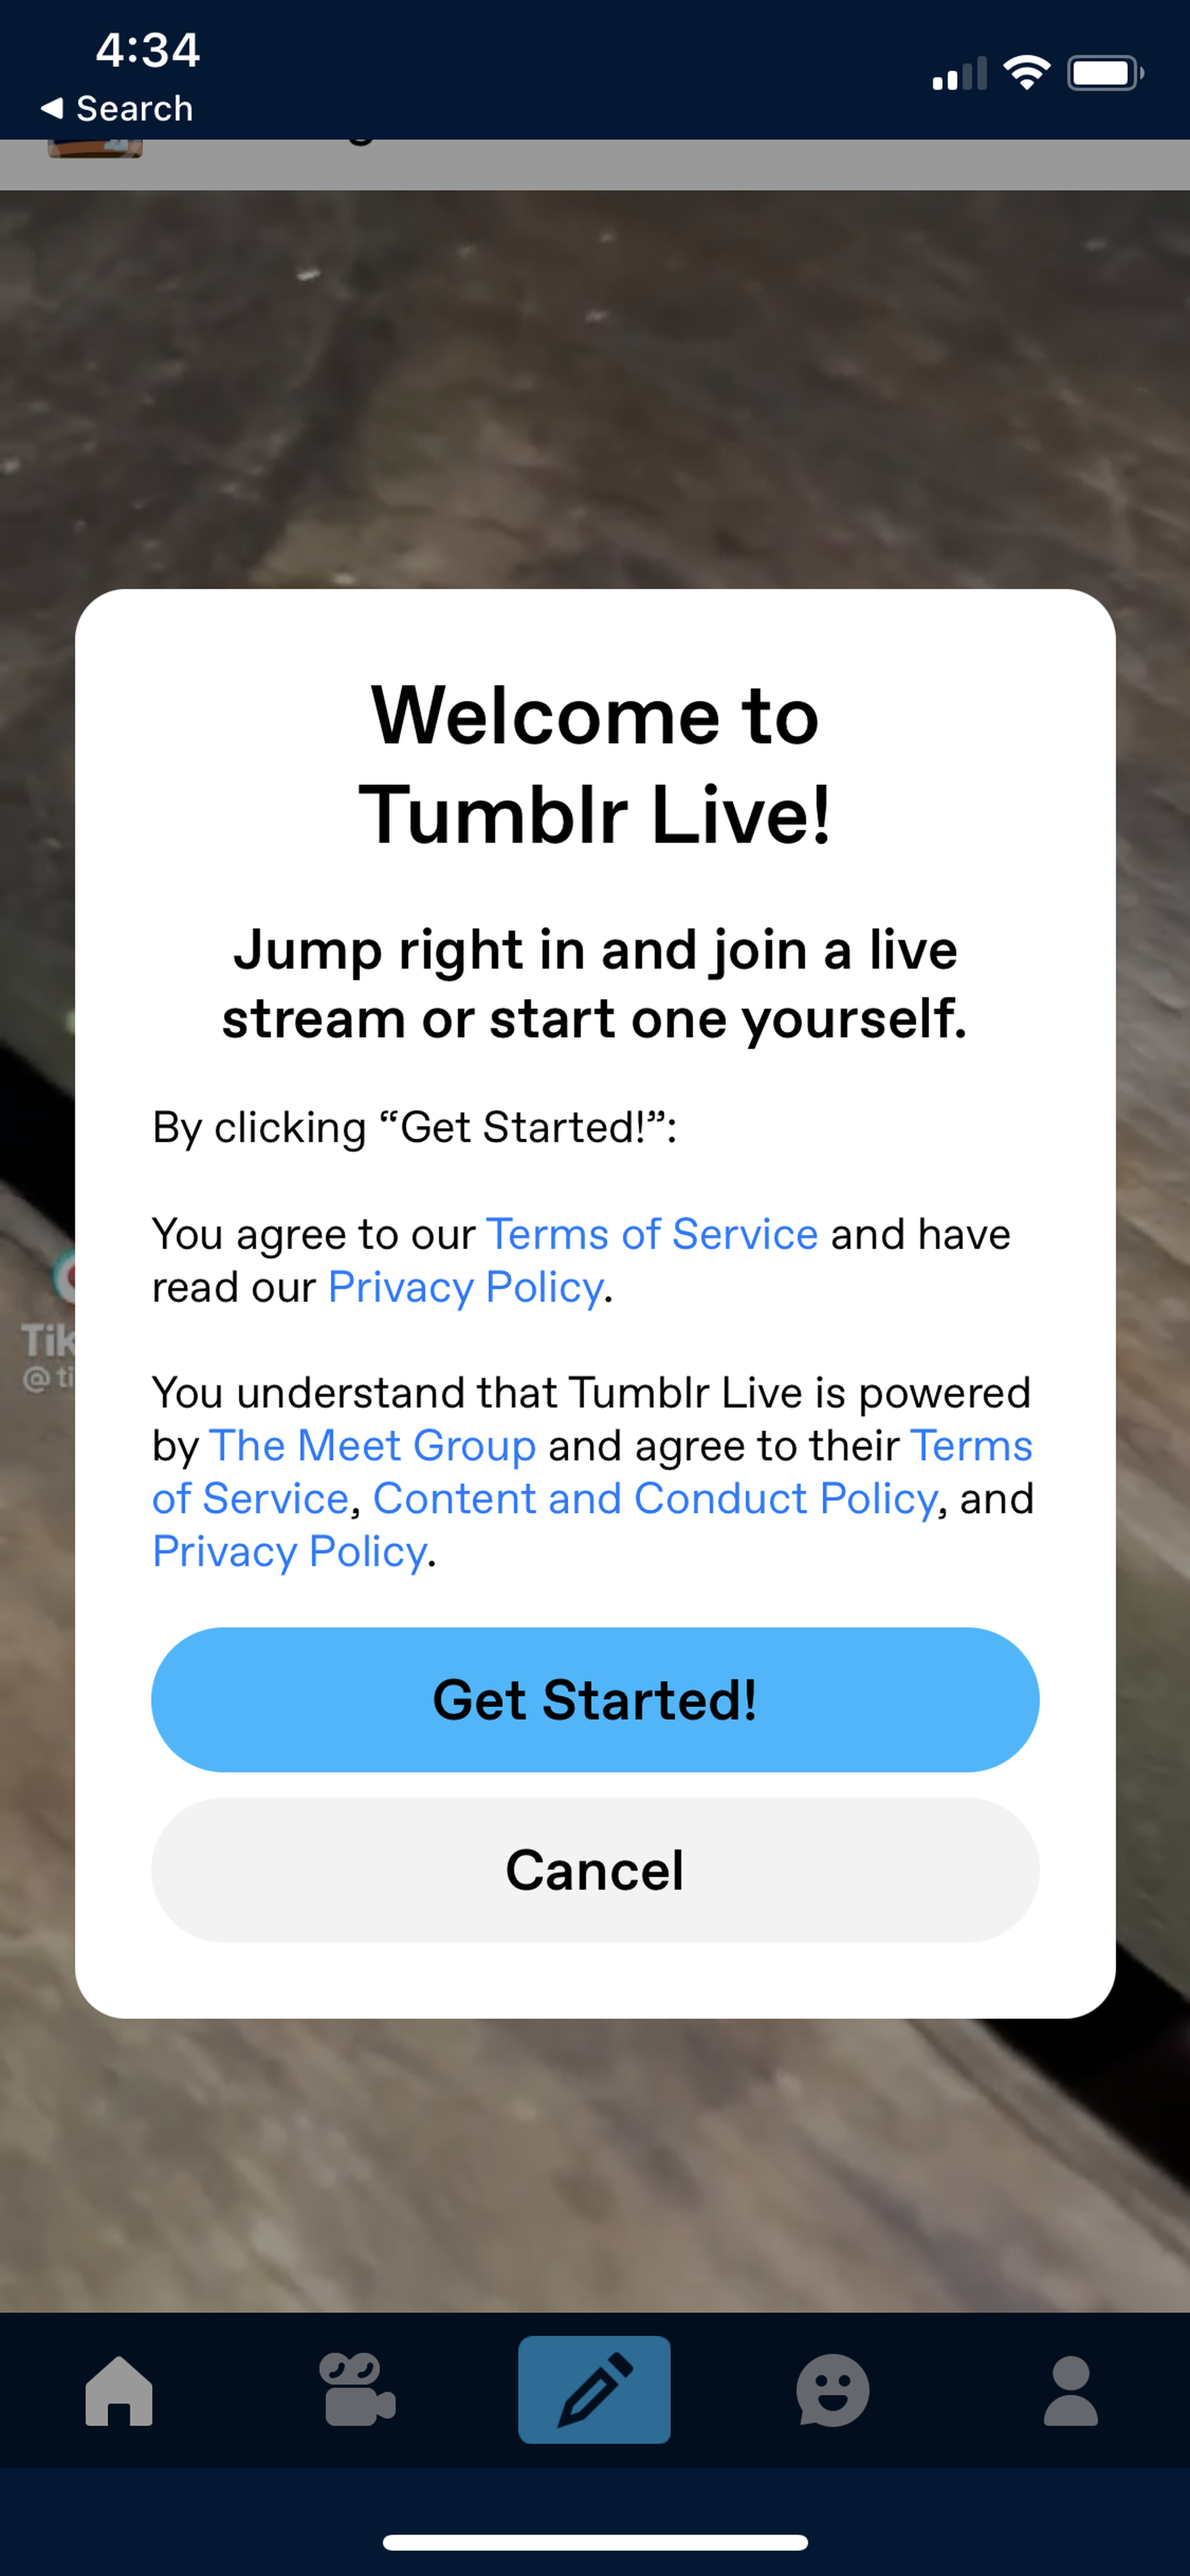 The Tumblr Live home screen on iOS.